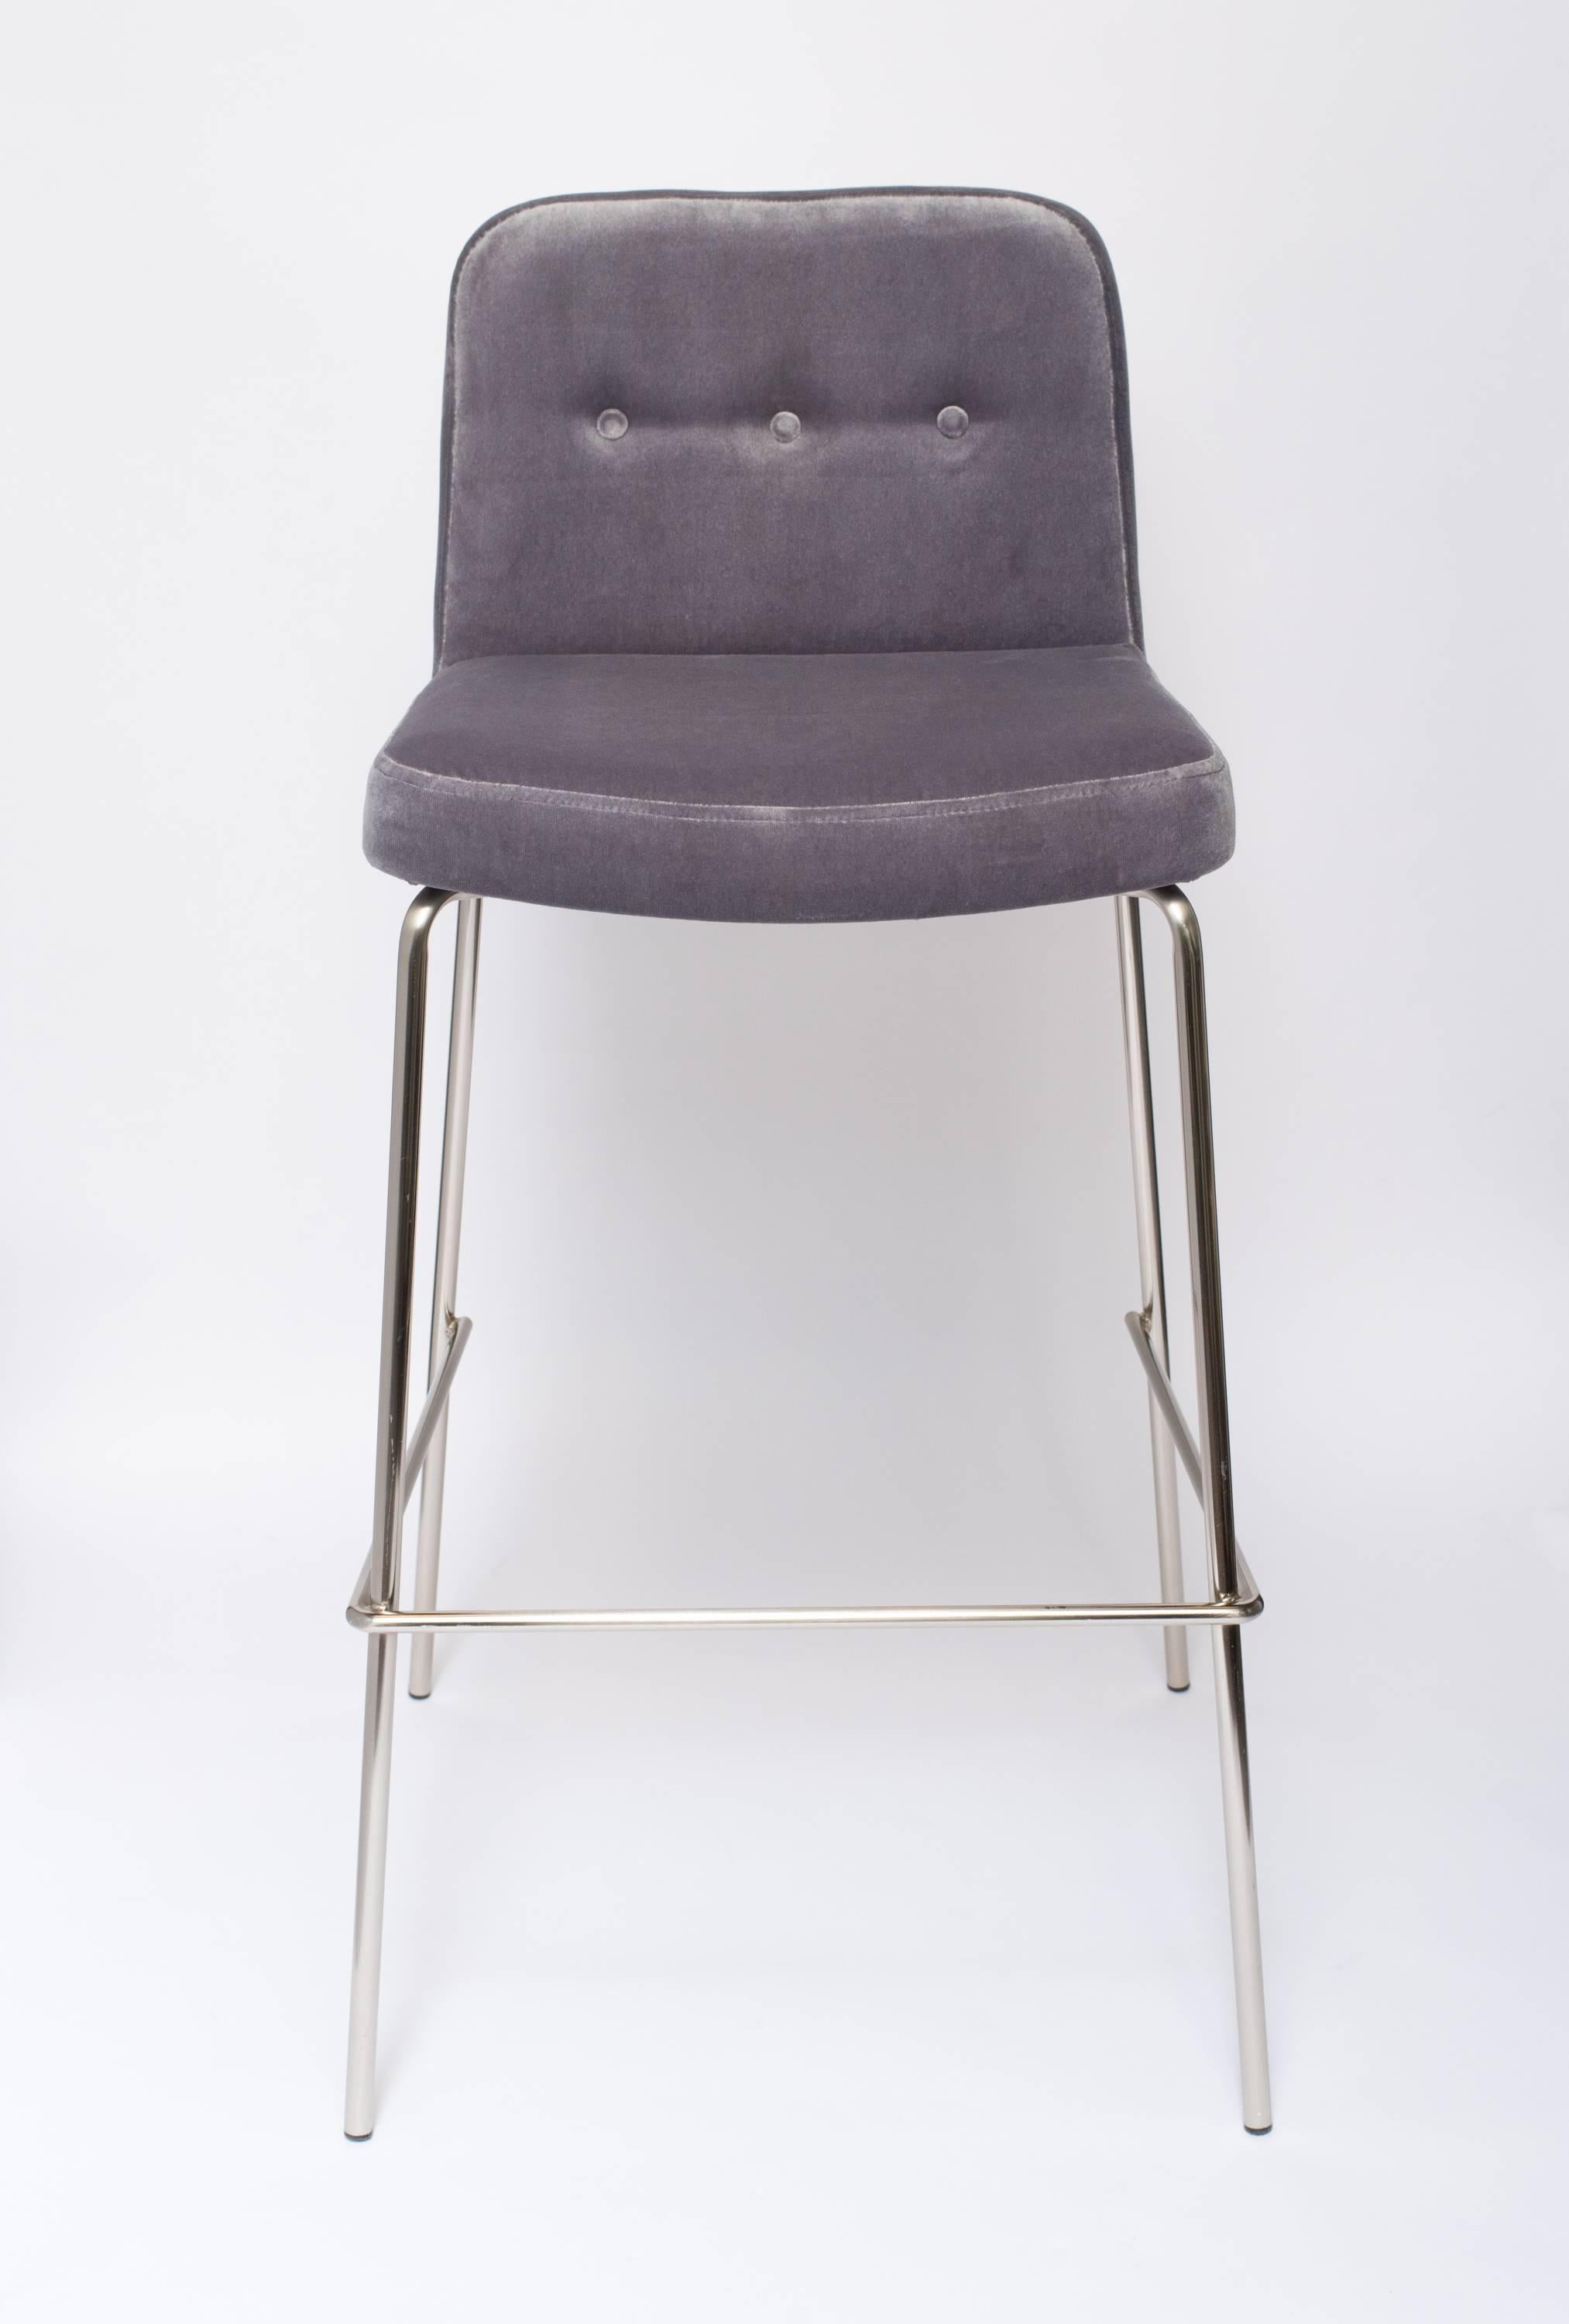 Tall bar stools with low back design. Great mid-century modern design featuring chromed steel frames. Newly upholstered in luxe grey velvet. Stools have button back details with footrest frames.